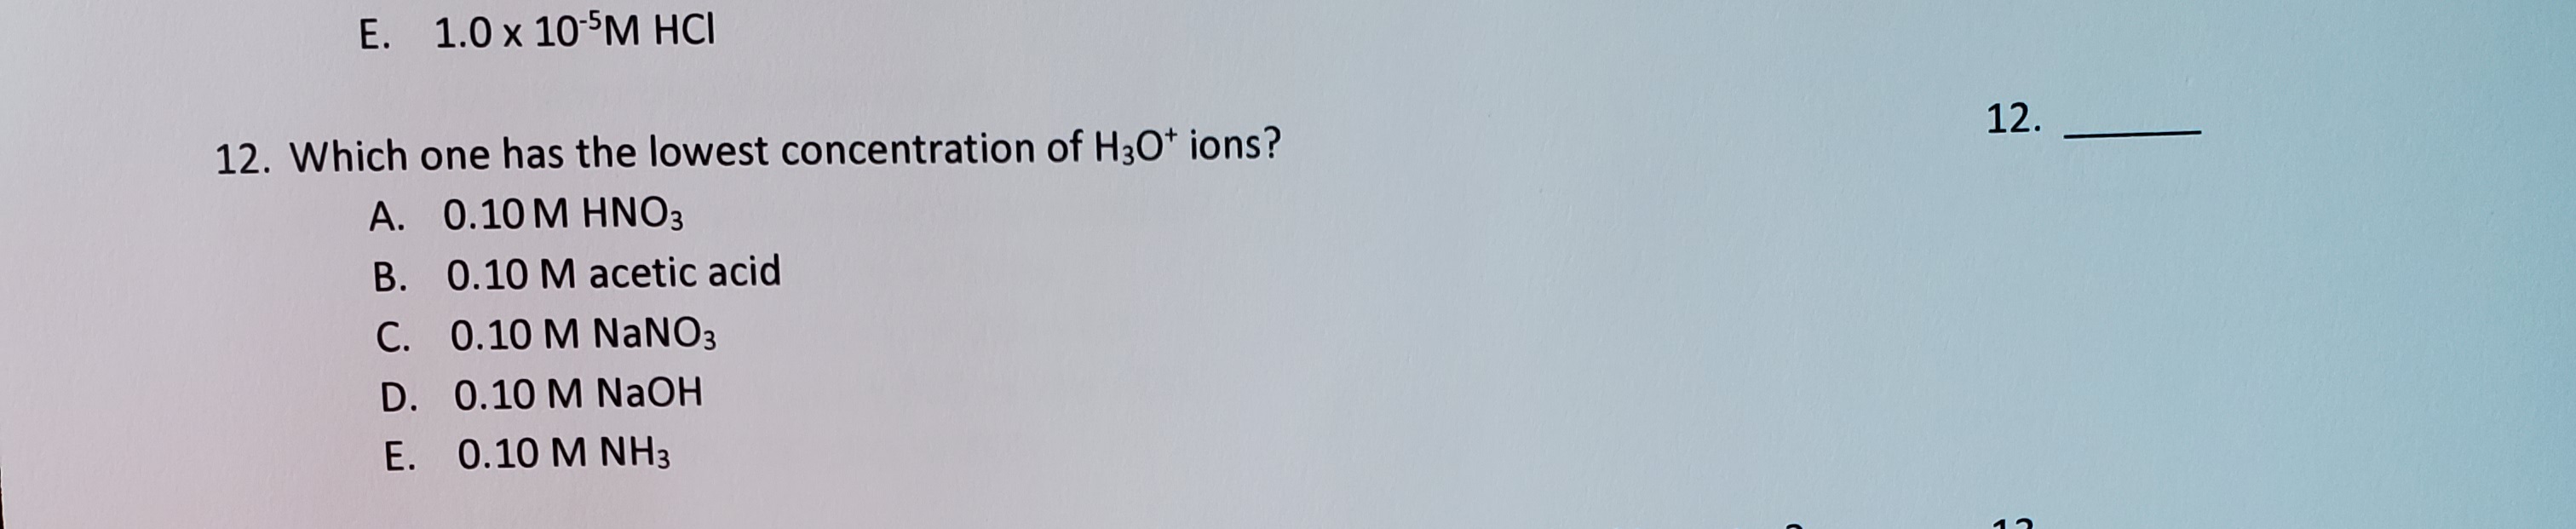 12. Which one has the lowest concentration of H3O* ions?
A. 0.10 M HNO3
B. 0.10 M acetic acid
C. 0.10 M NaNO3
D. 0.10 M NaOH
E. 0.10 M NH3
